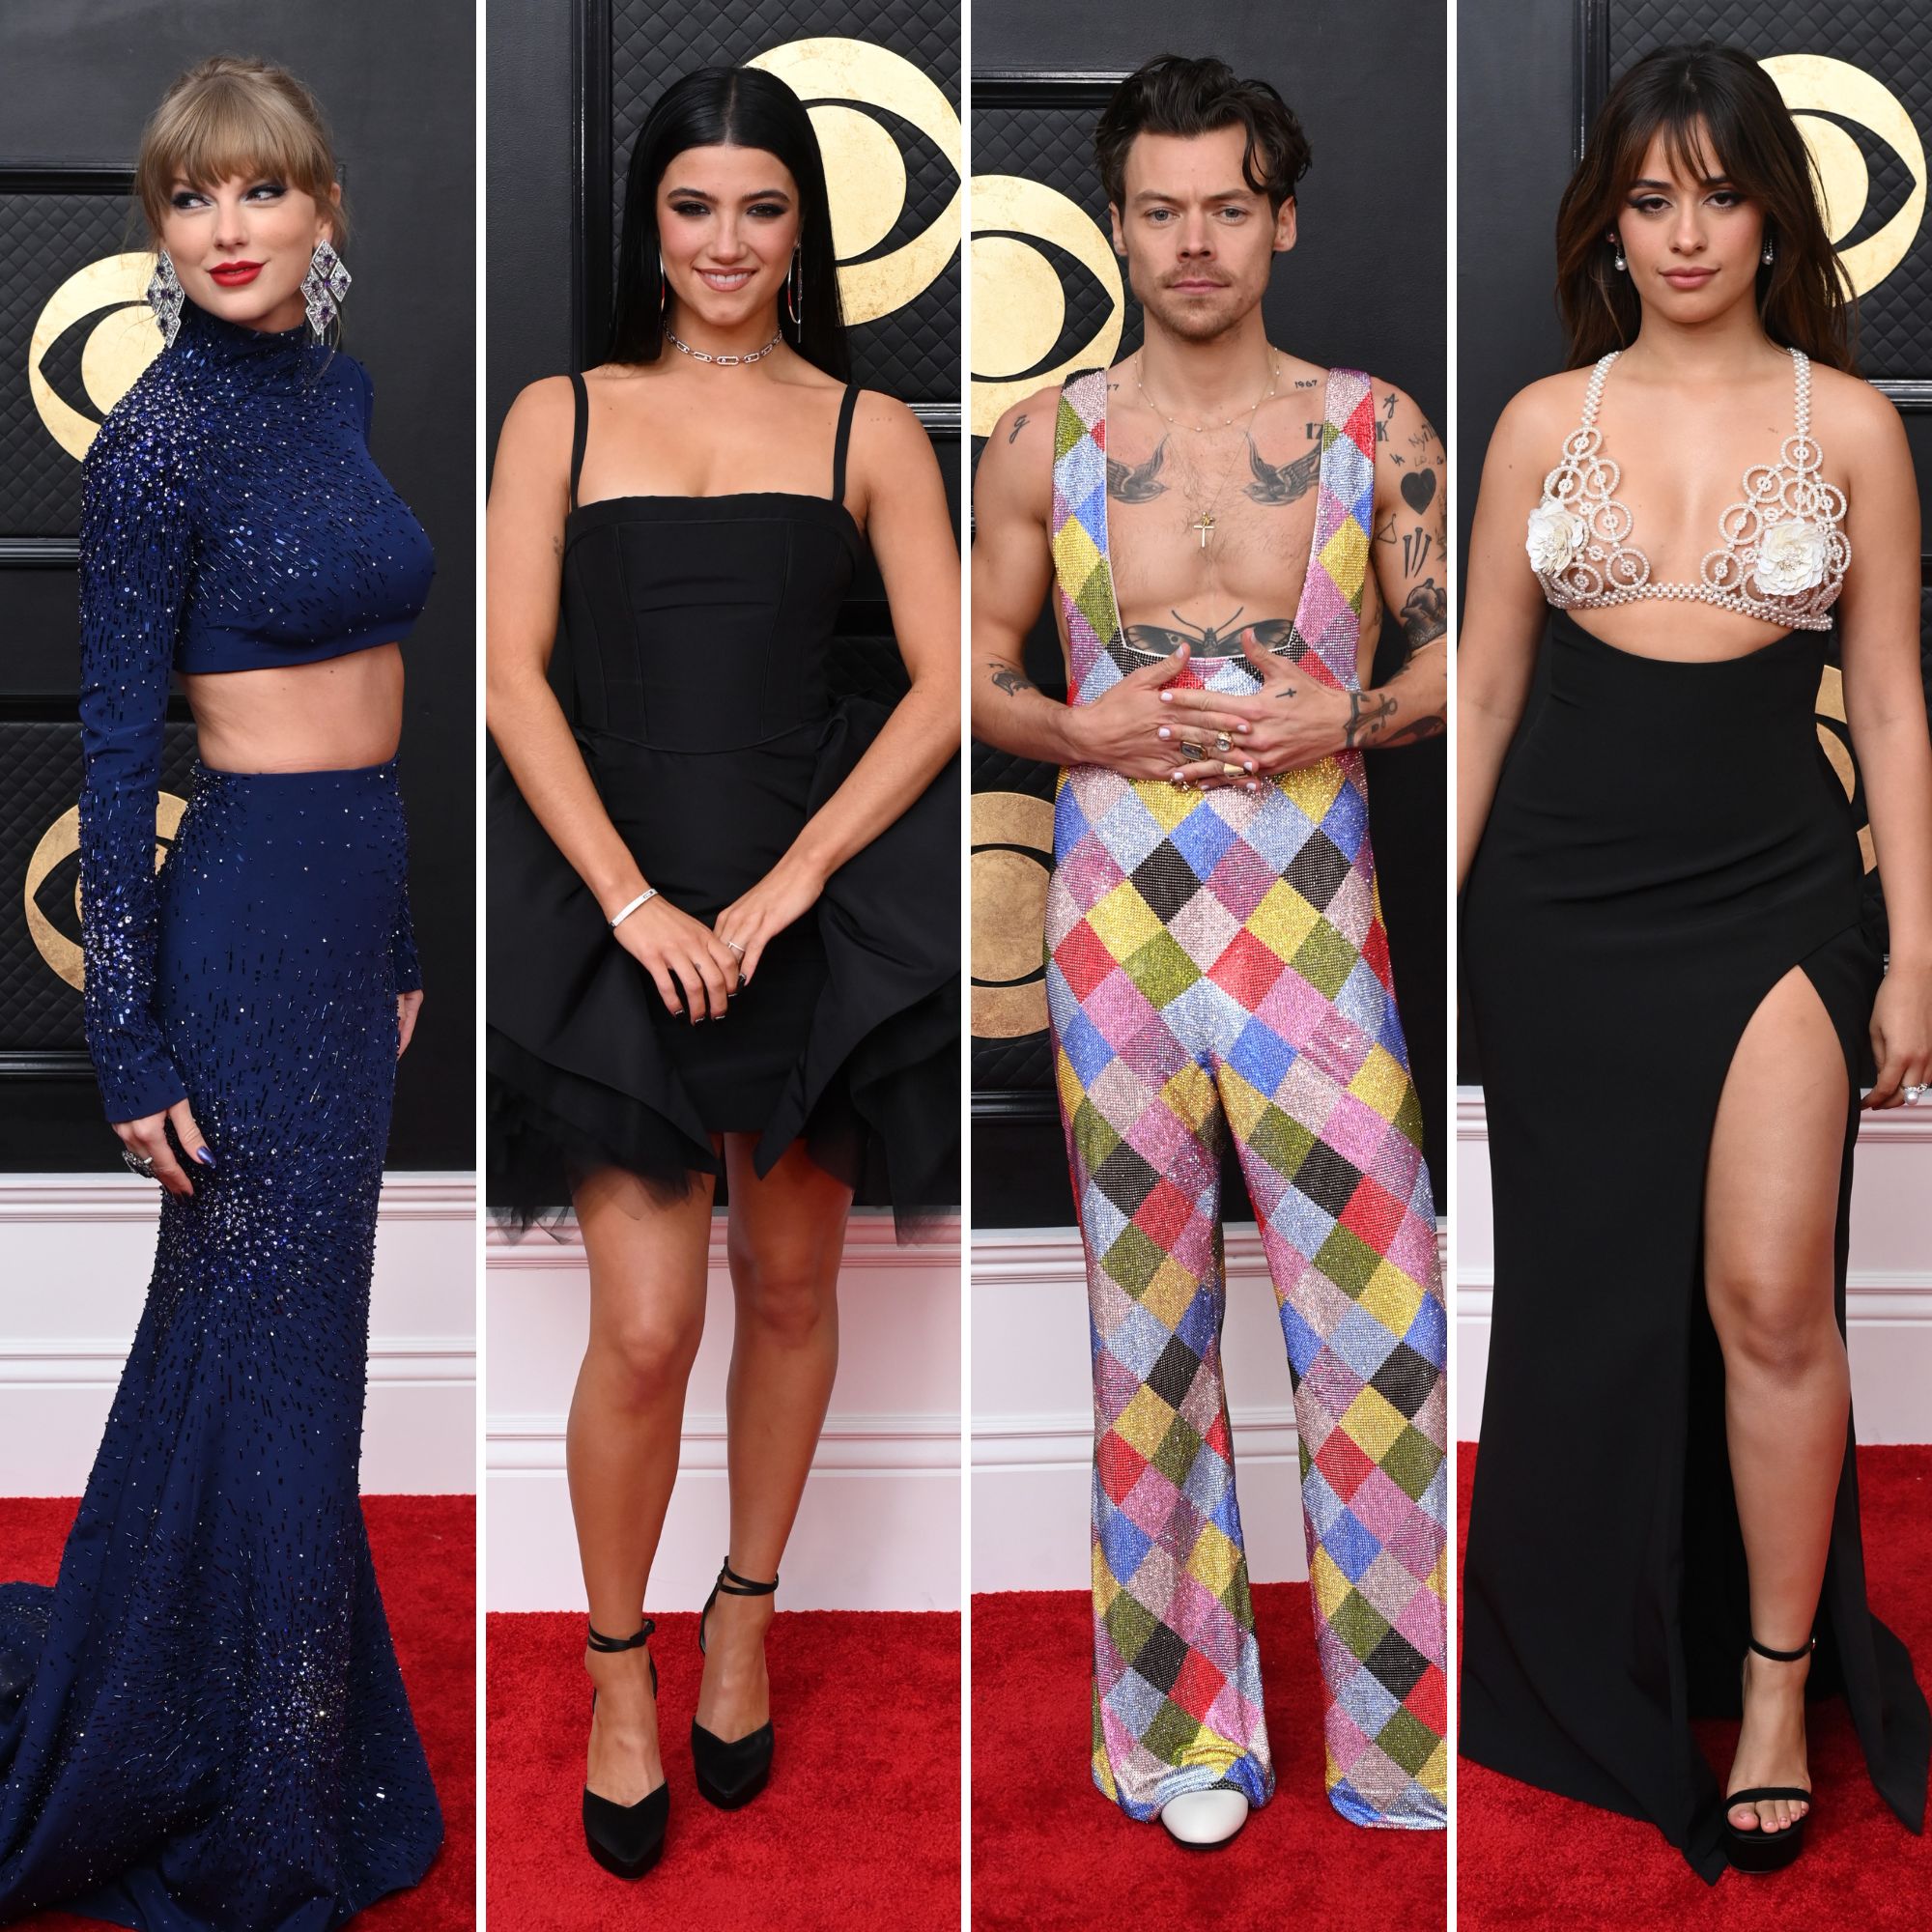 Grammys 2023 Red Carpet Photo: Young Hollywood Stars